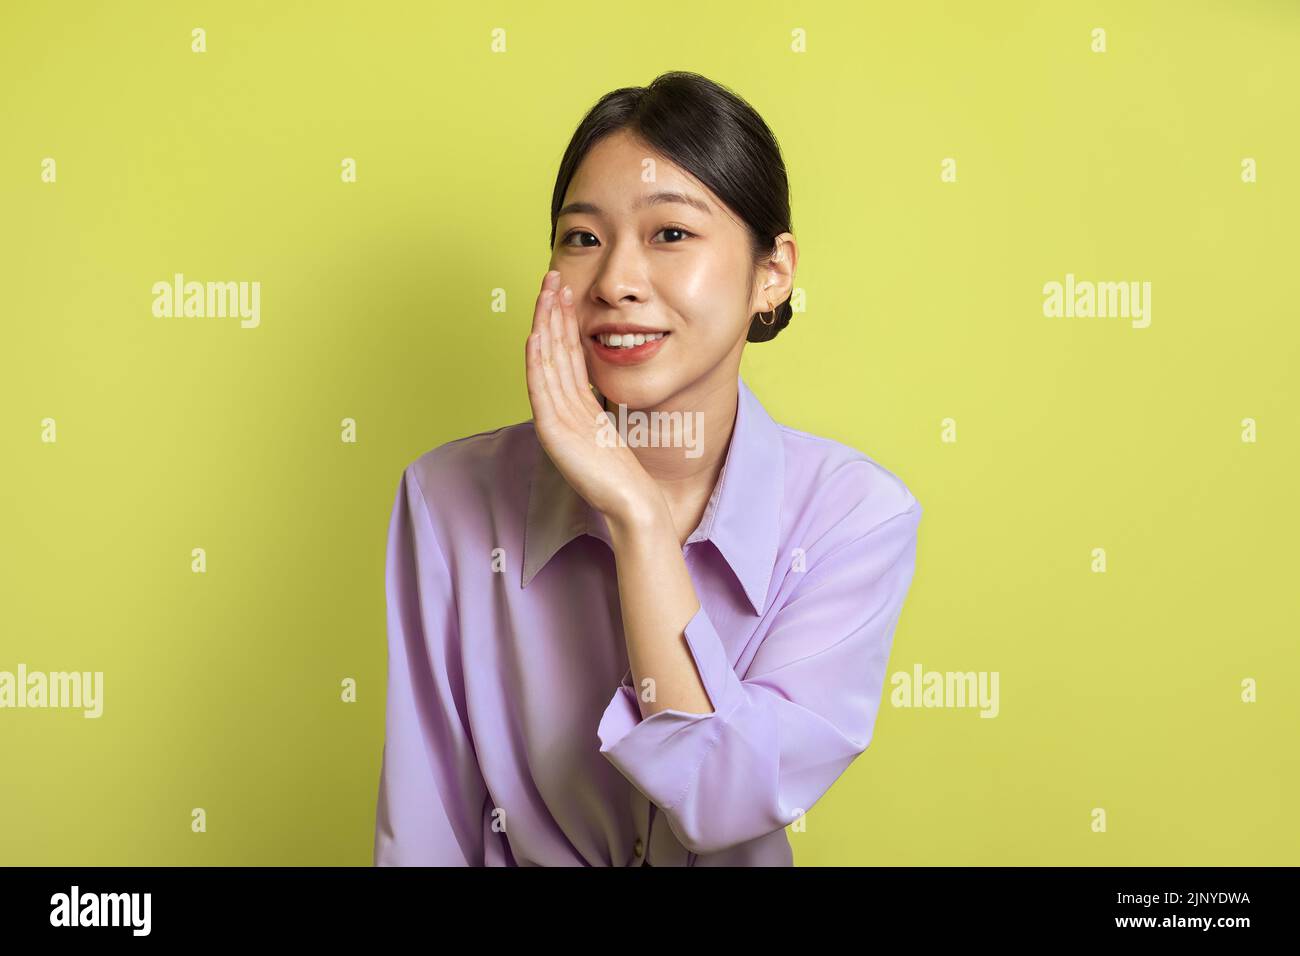 Smiling Japanese Woman Whispering Holding Hand Near Mouth, Yellow Background Stock Photo